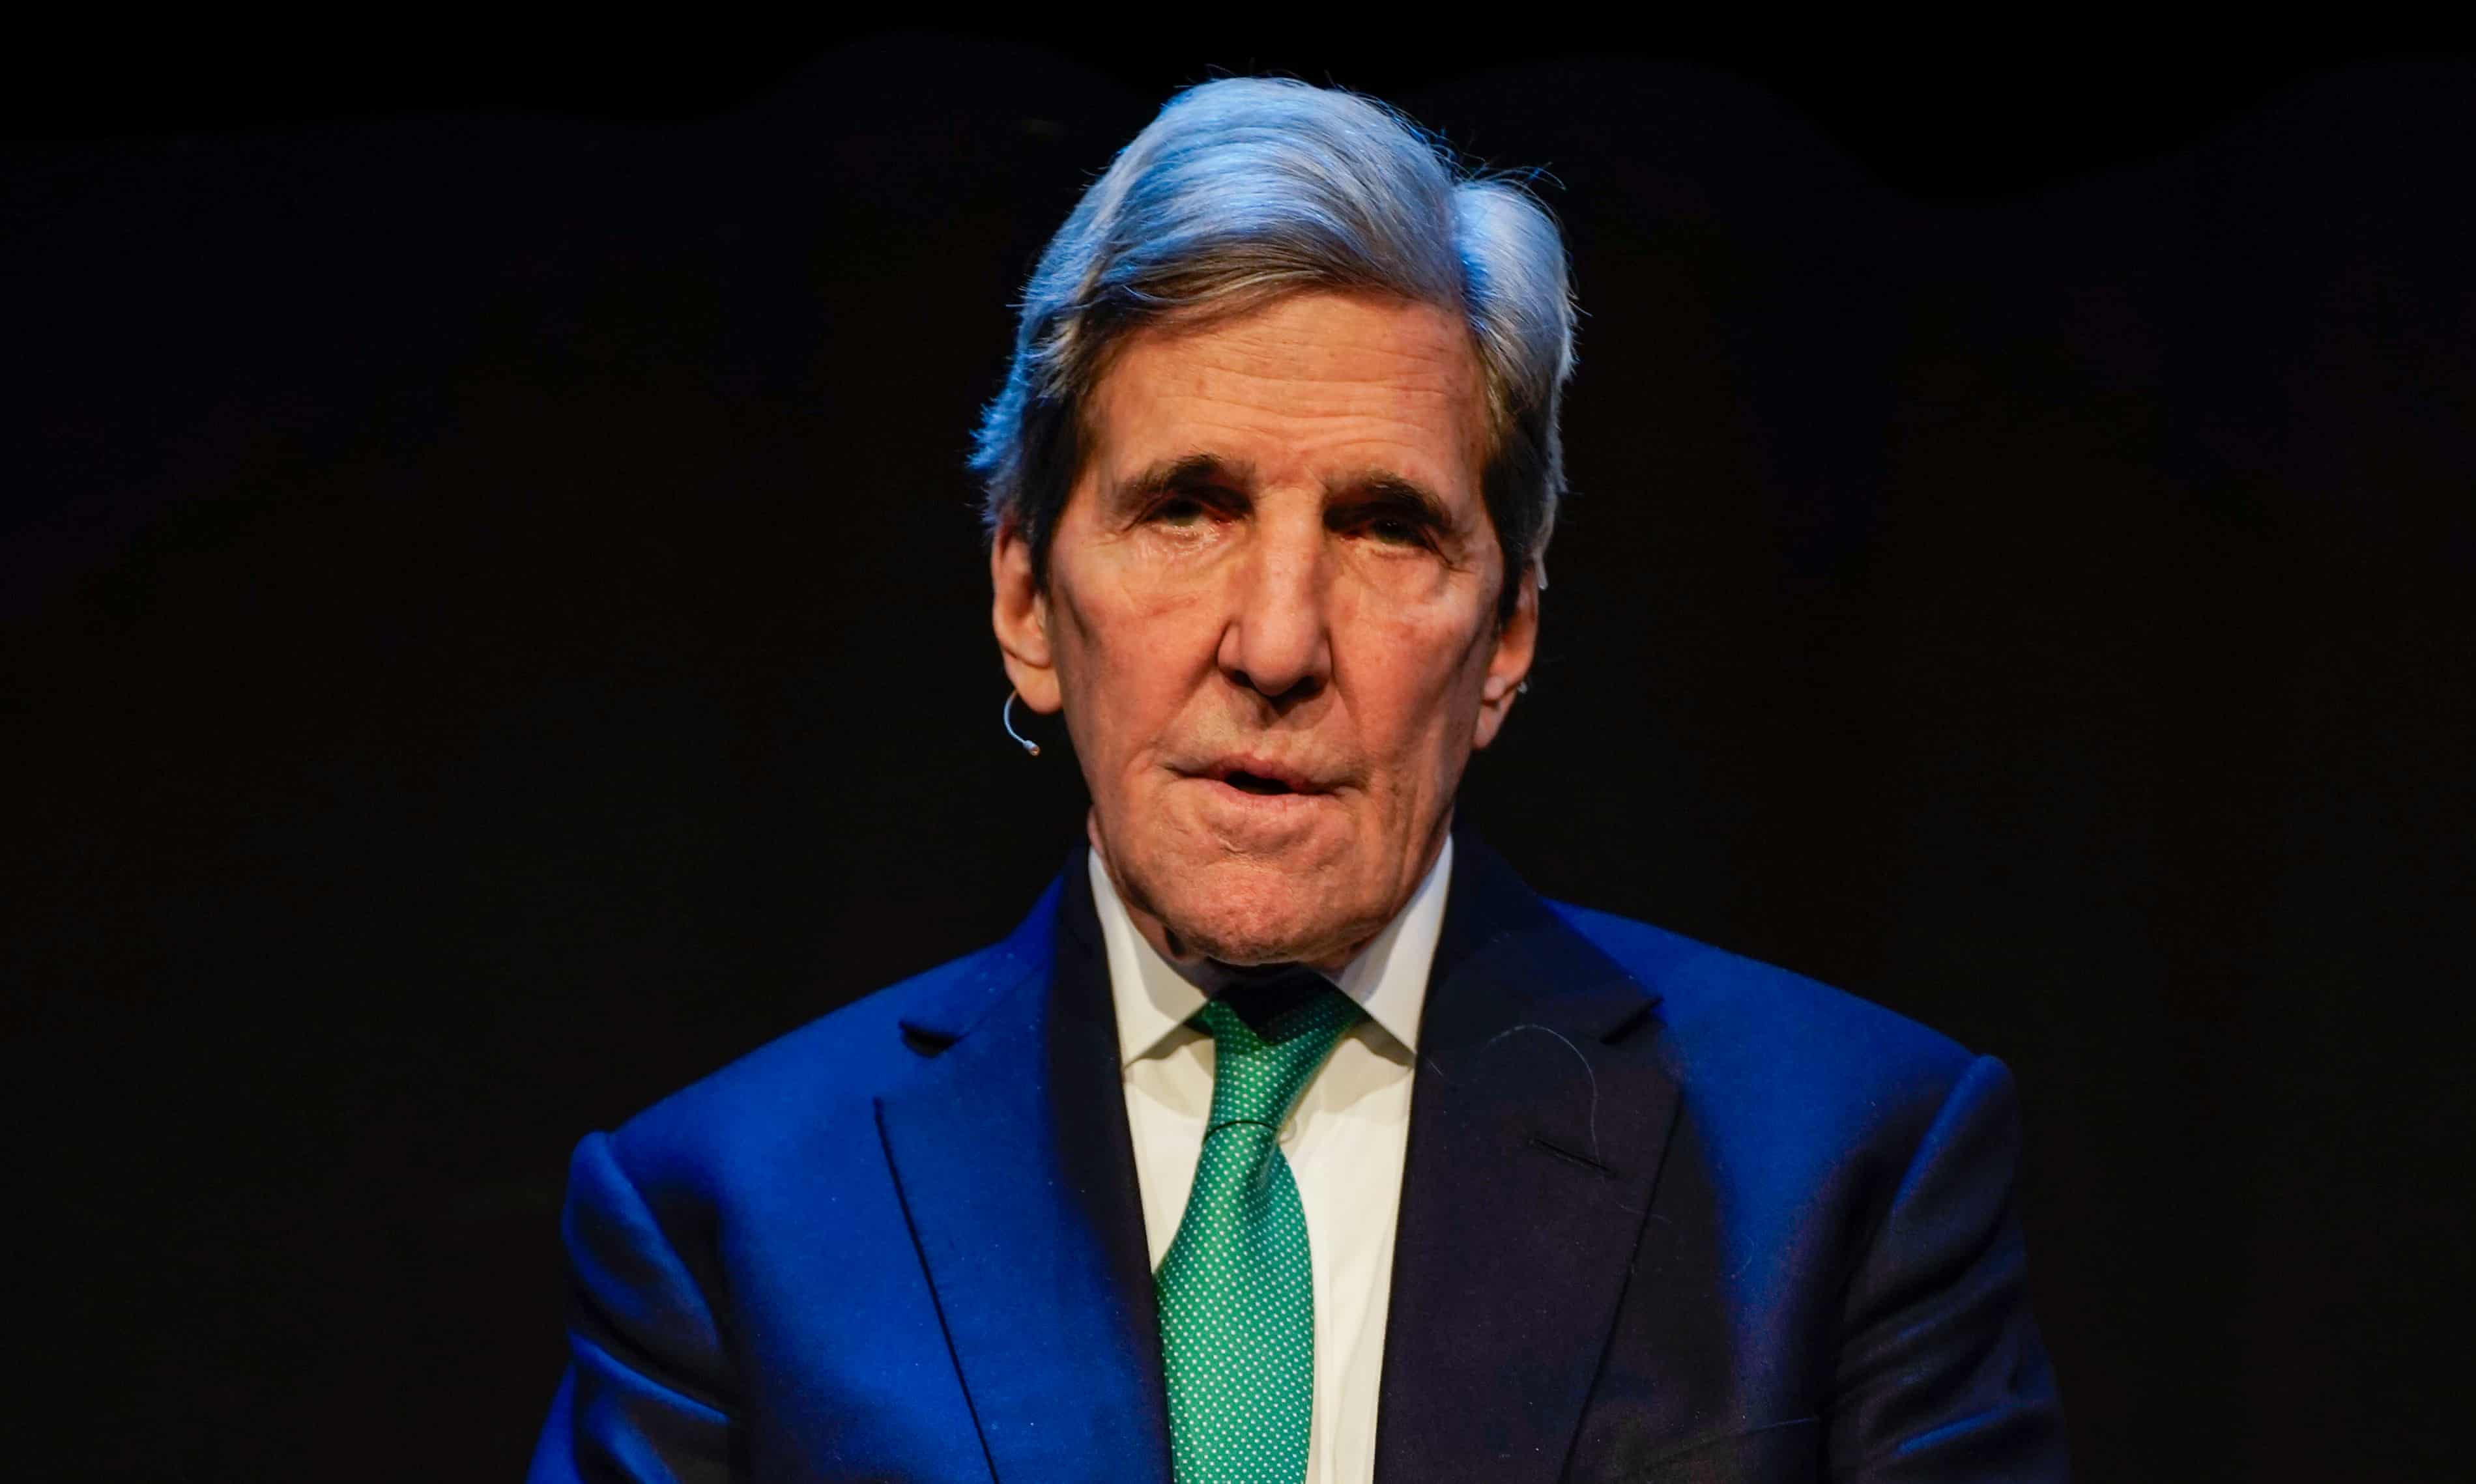 Populism imperilling global fight against climate breakdown, says John Kerry (theguardian.com)